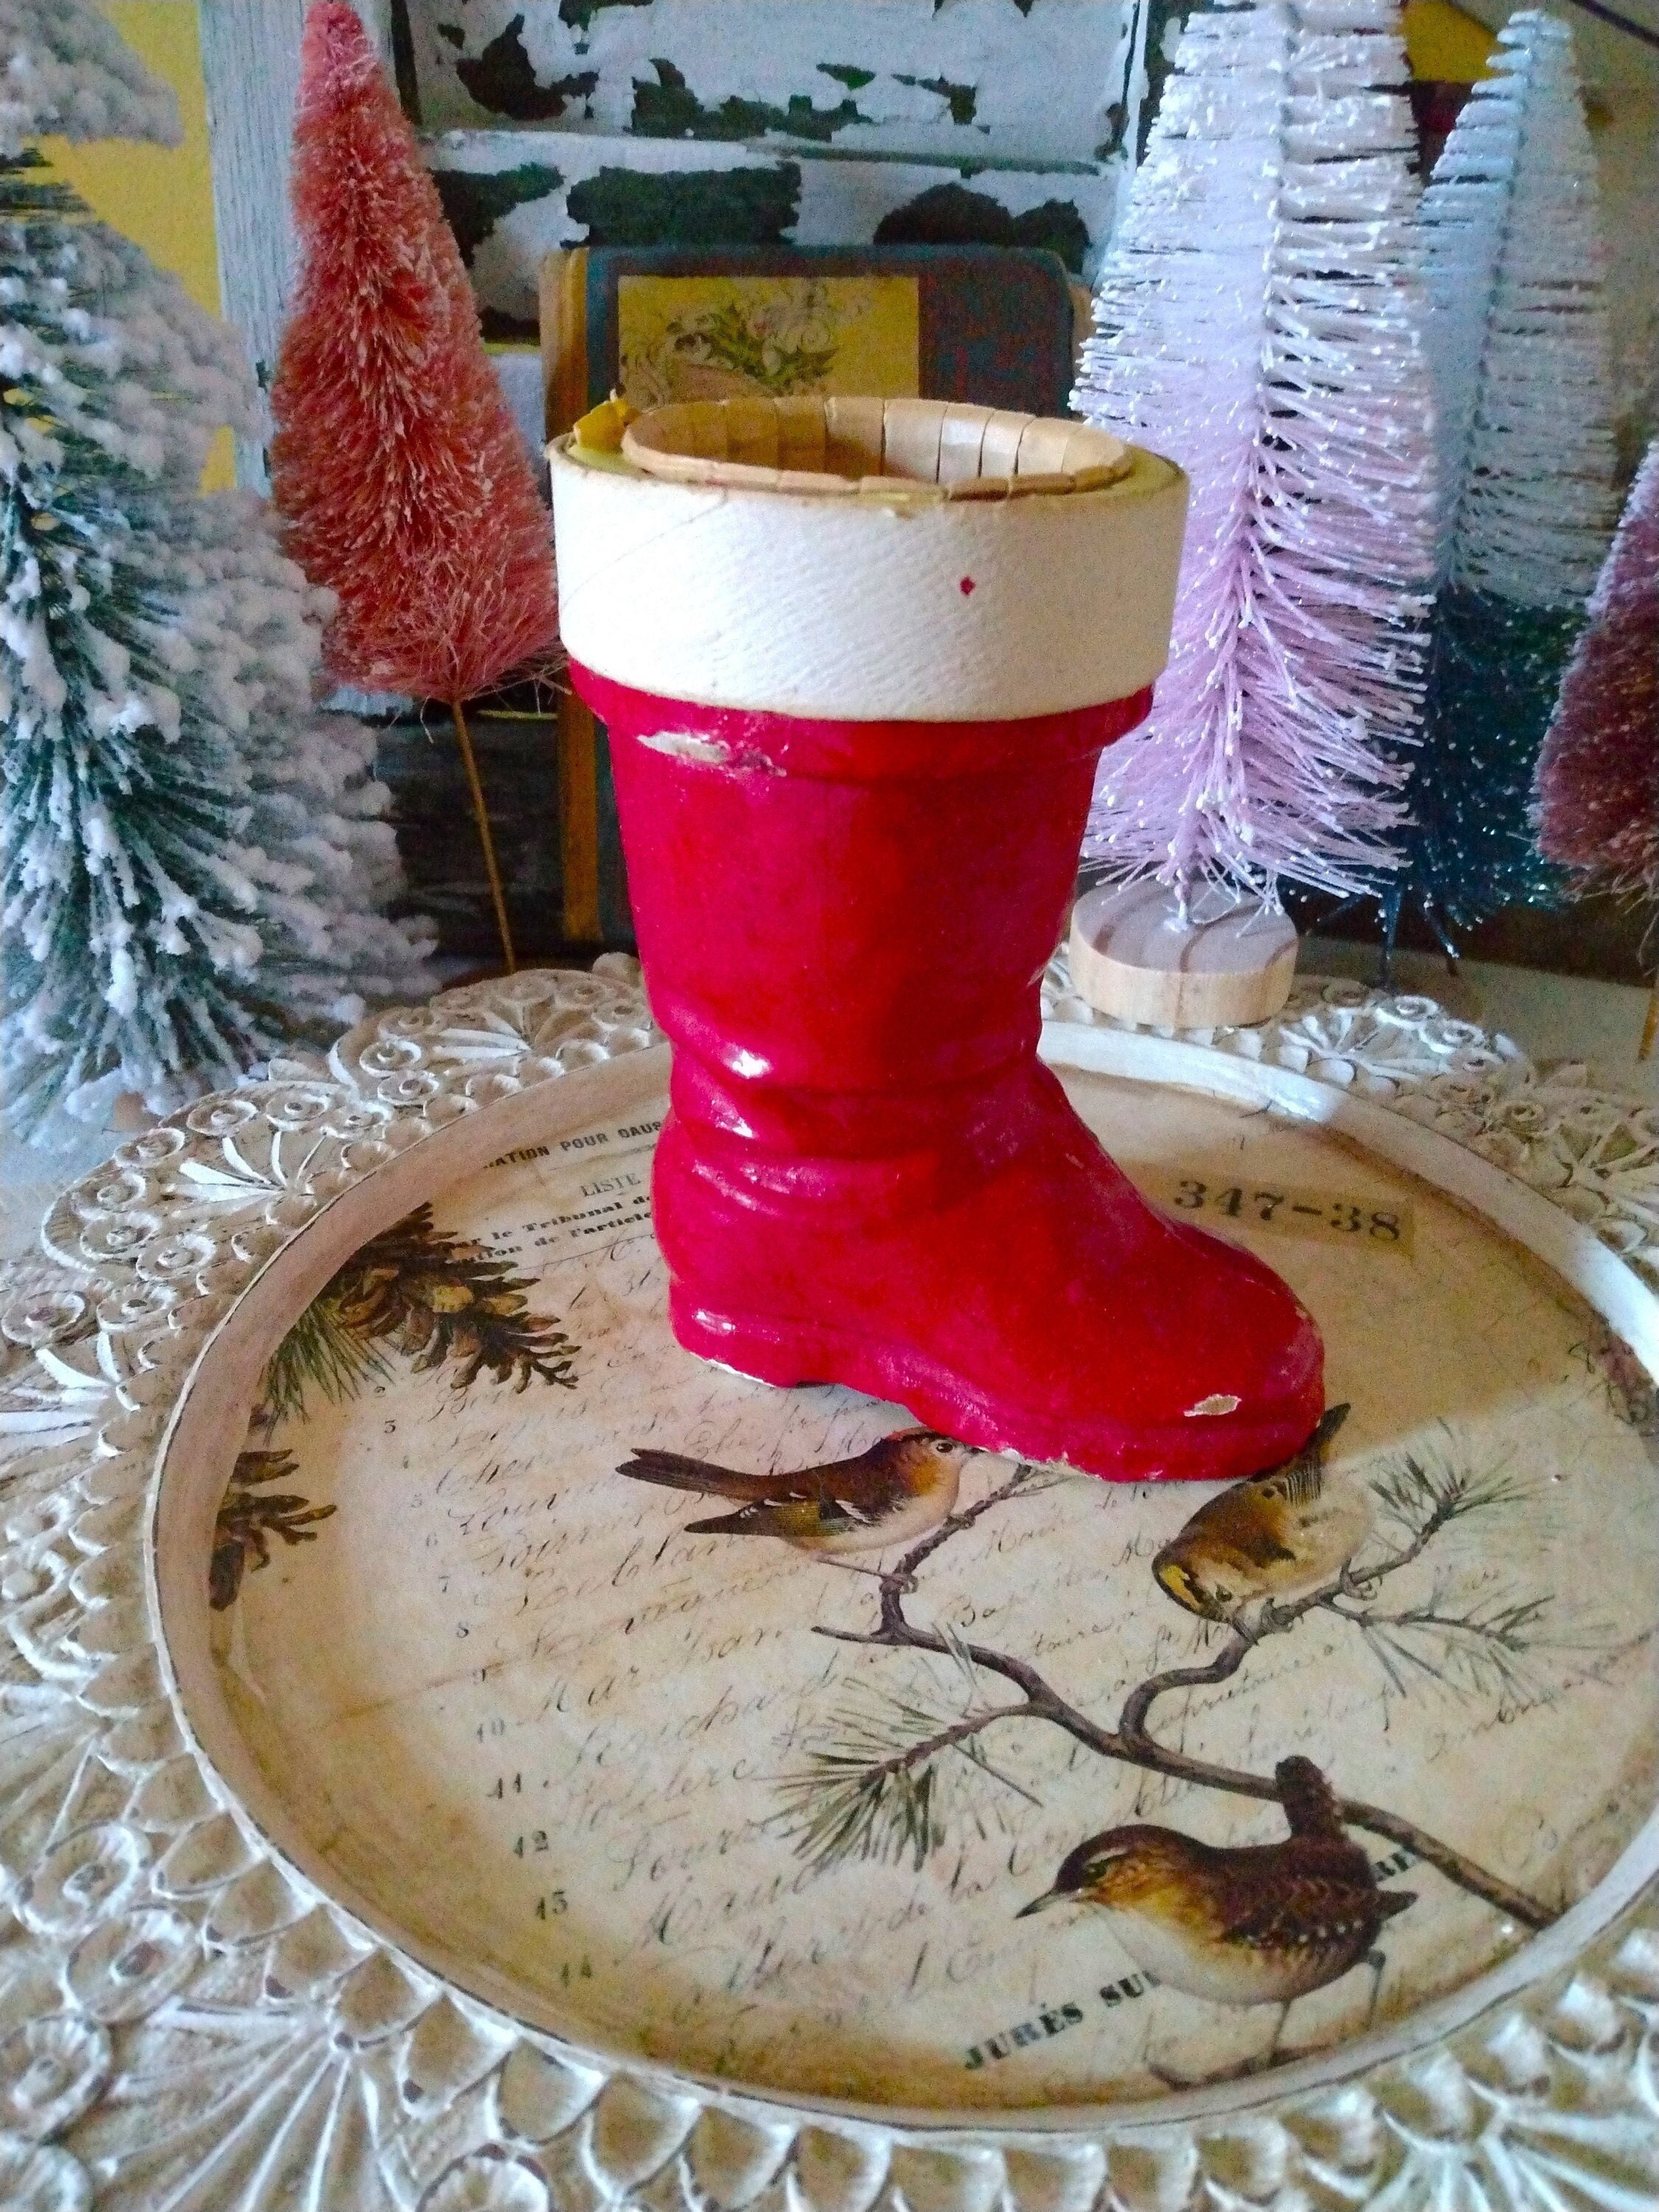 17 Illuminated Candy Cane Arrangement in Santa Boot by Valerie